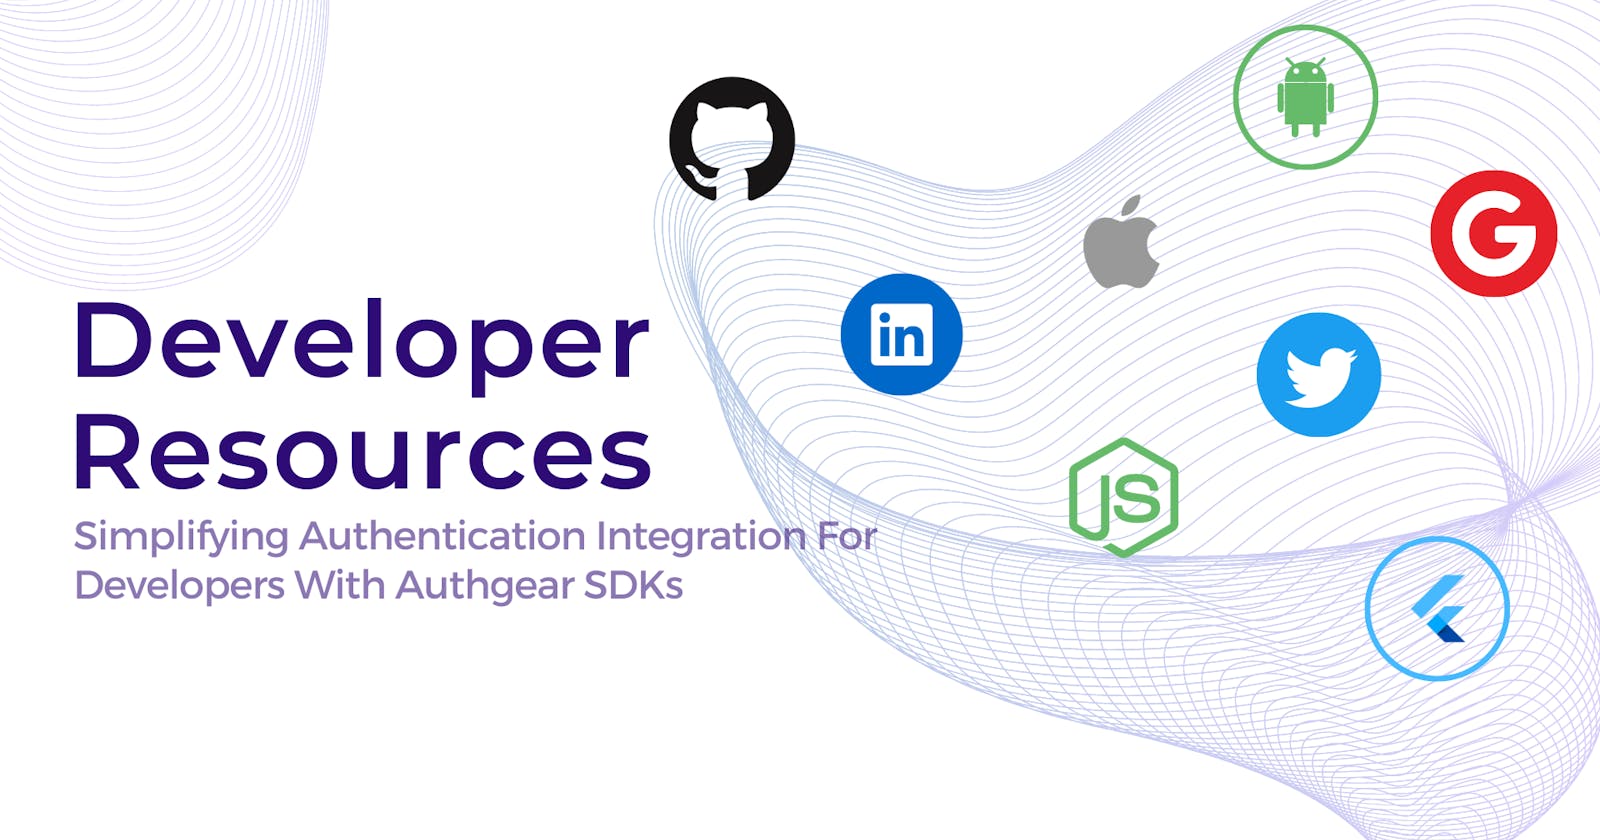 Simplifying Authentication Integration For Developers With Authgear SDKs